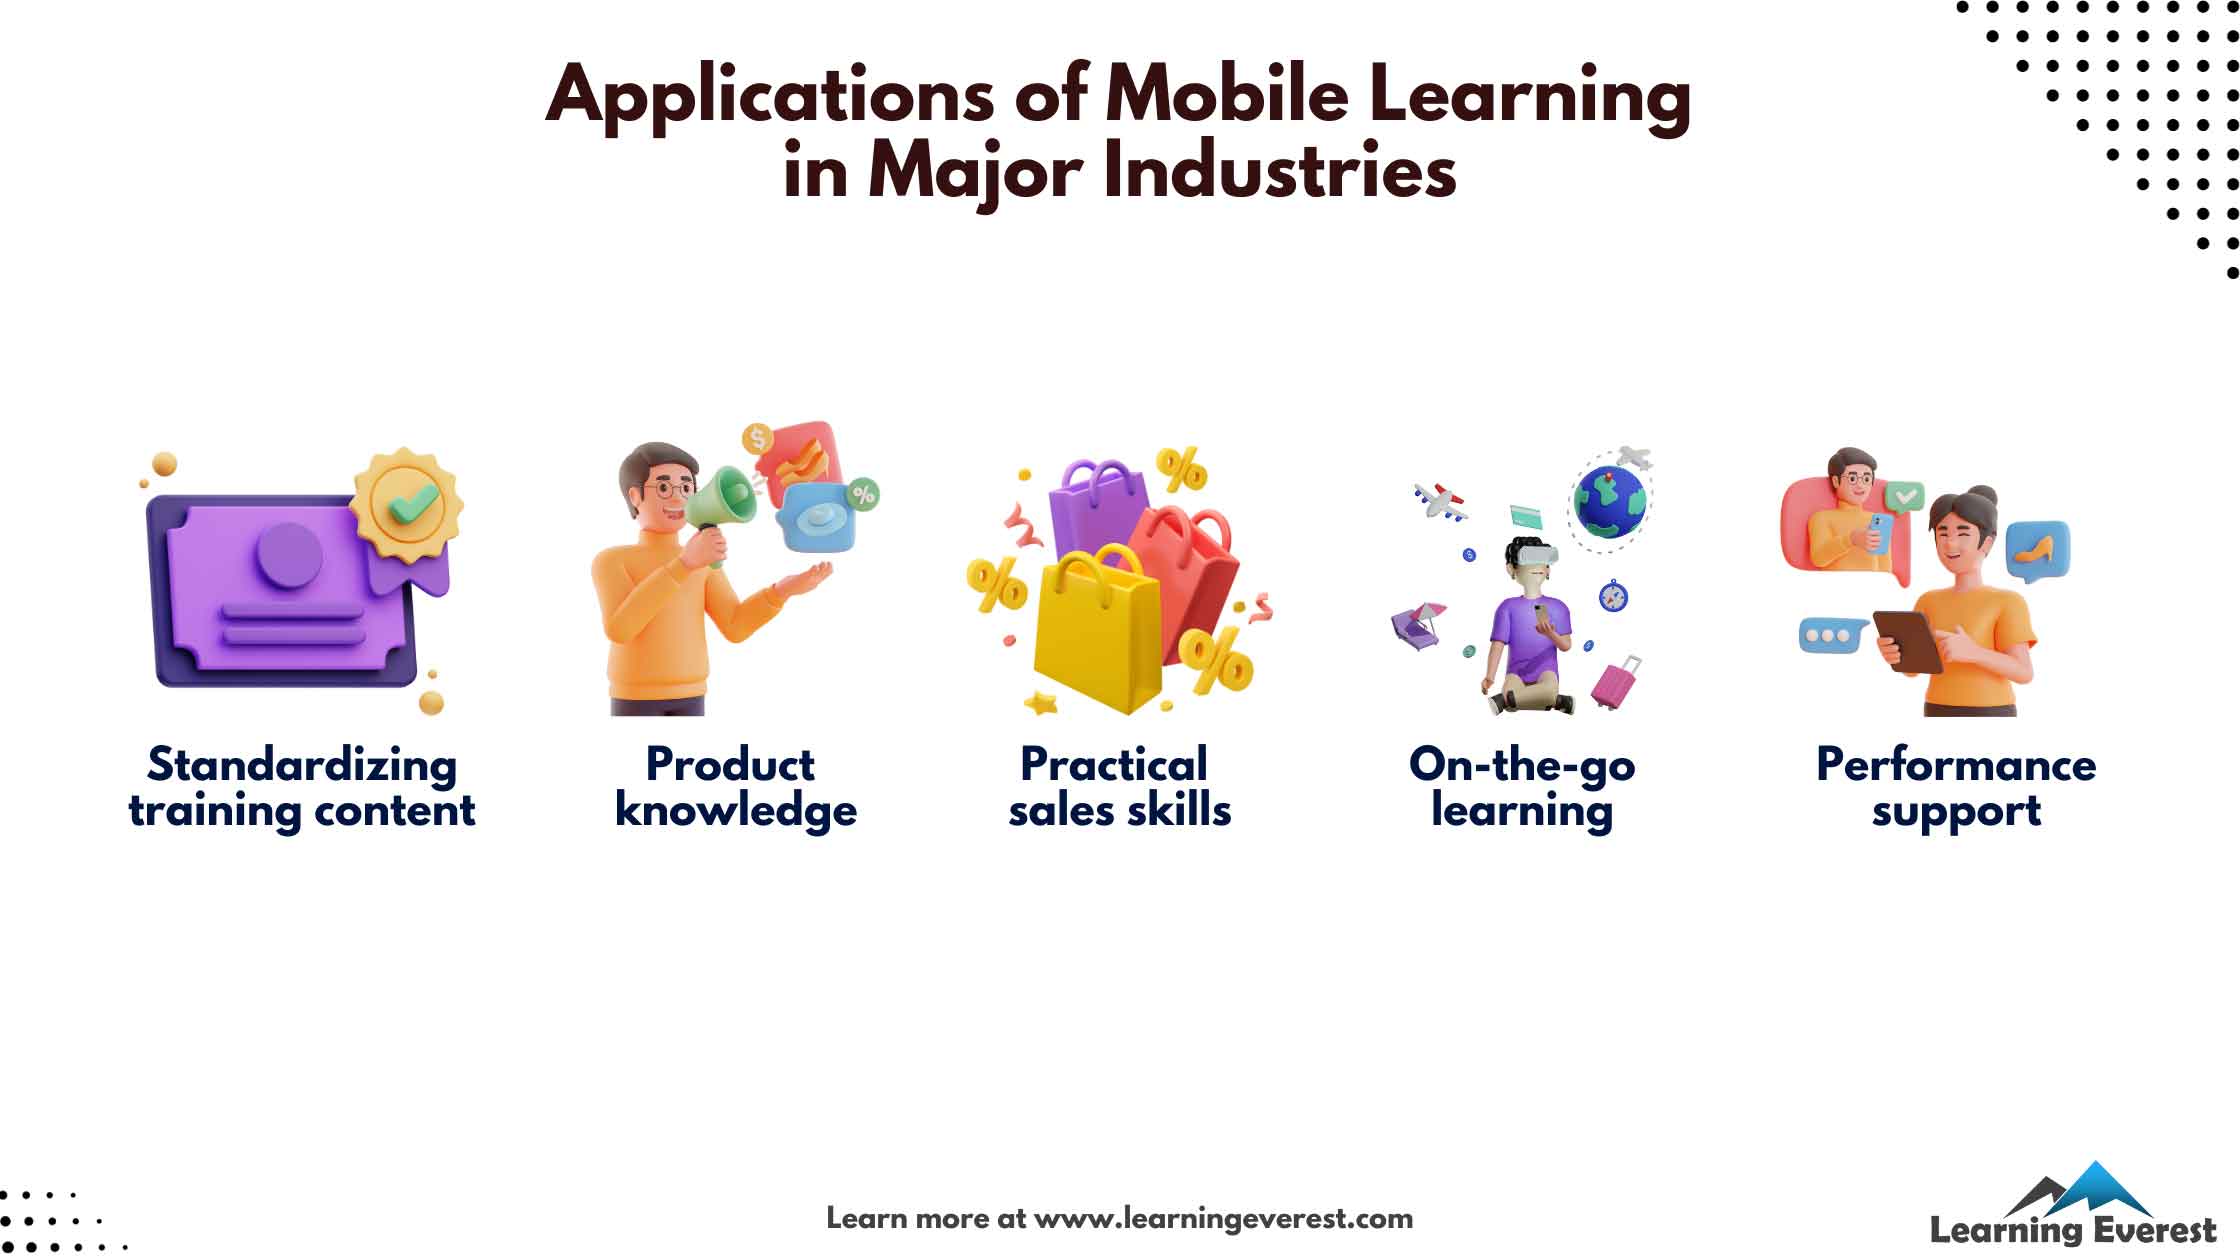 Applications of Mobile Learning in Major Industries